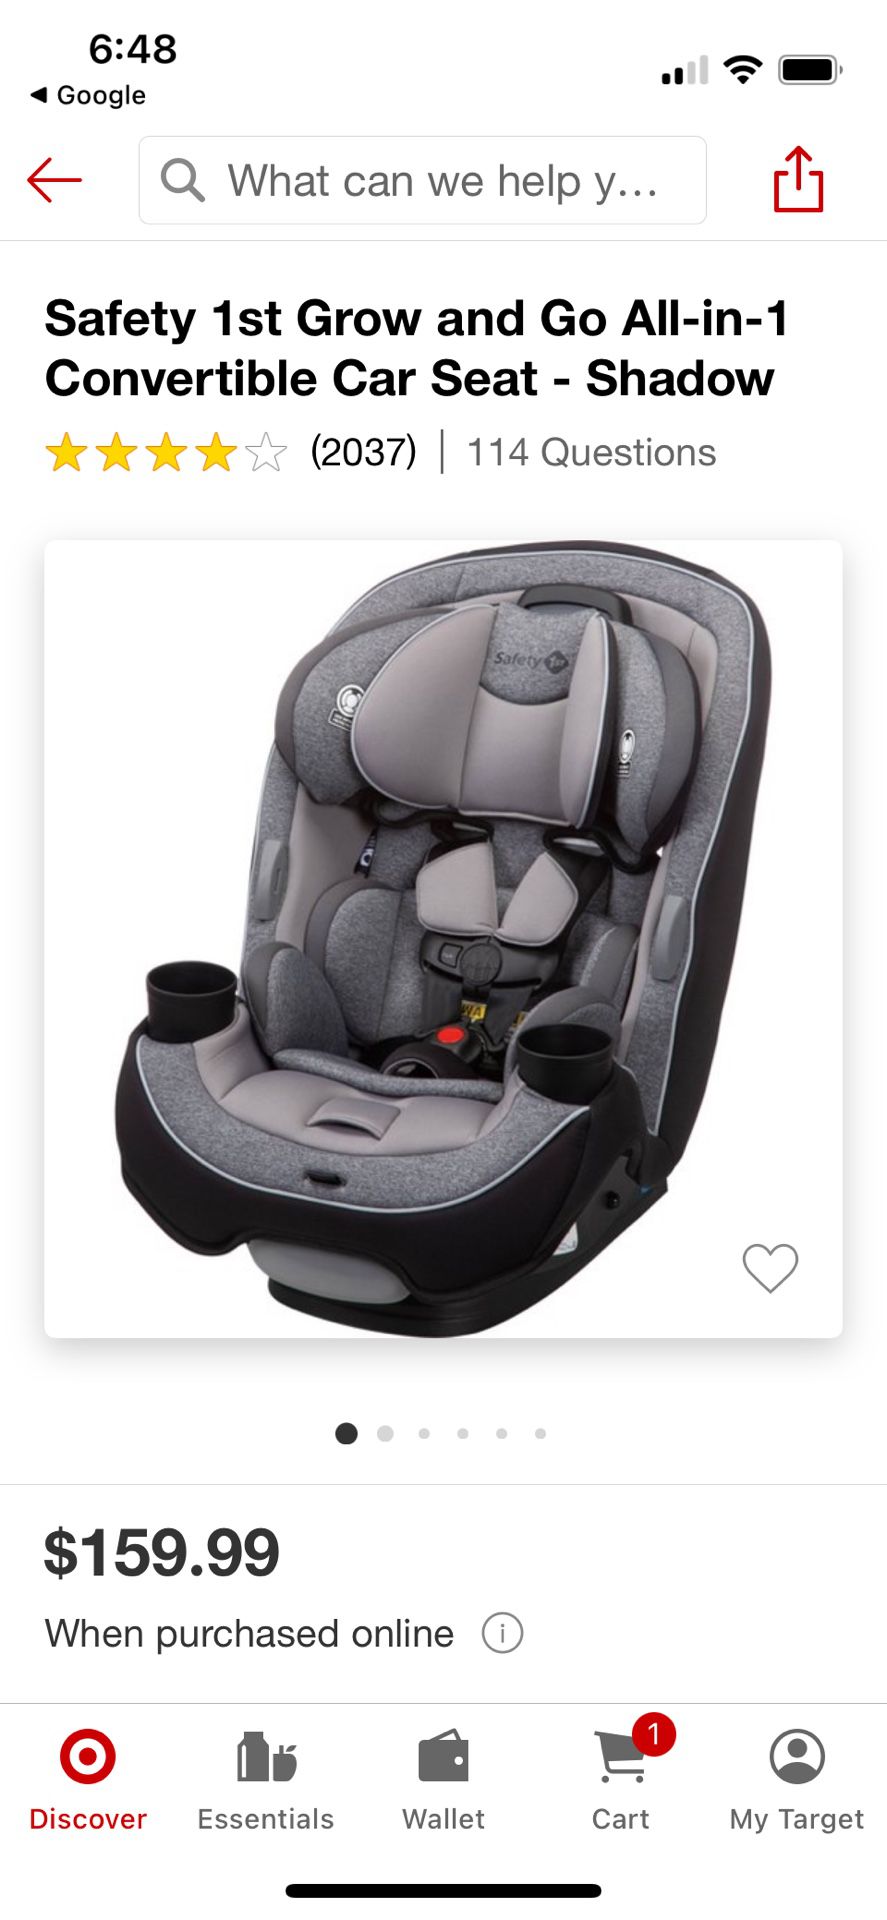 Safety 1st Grow and Go All-in-1 Convertible Car Seat 